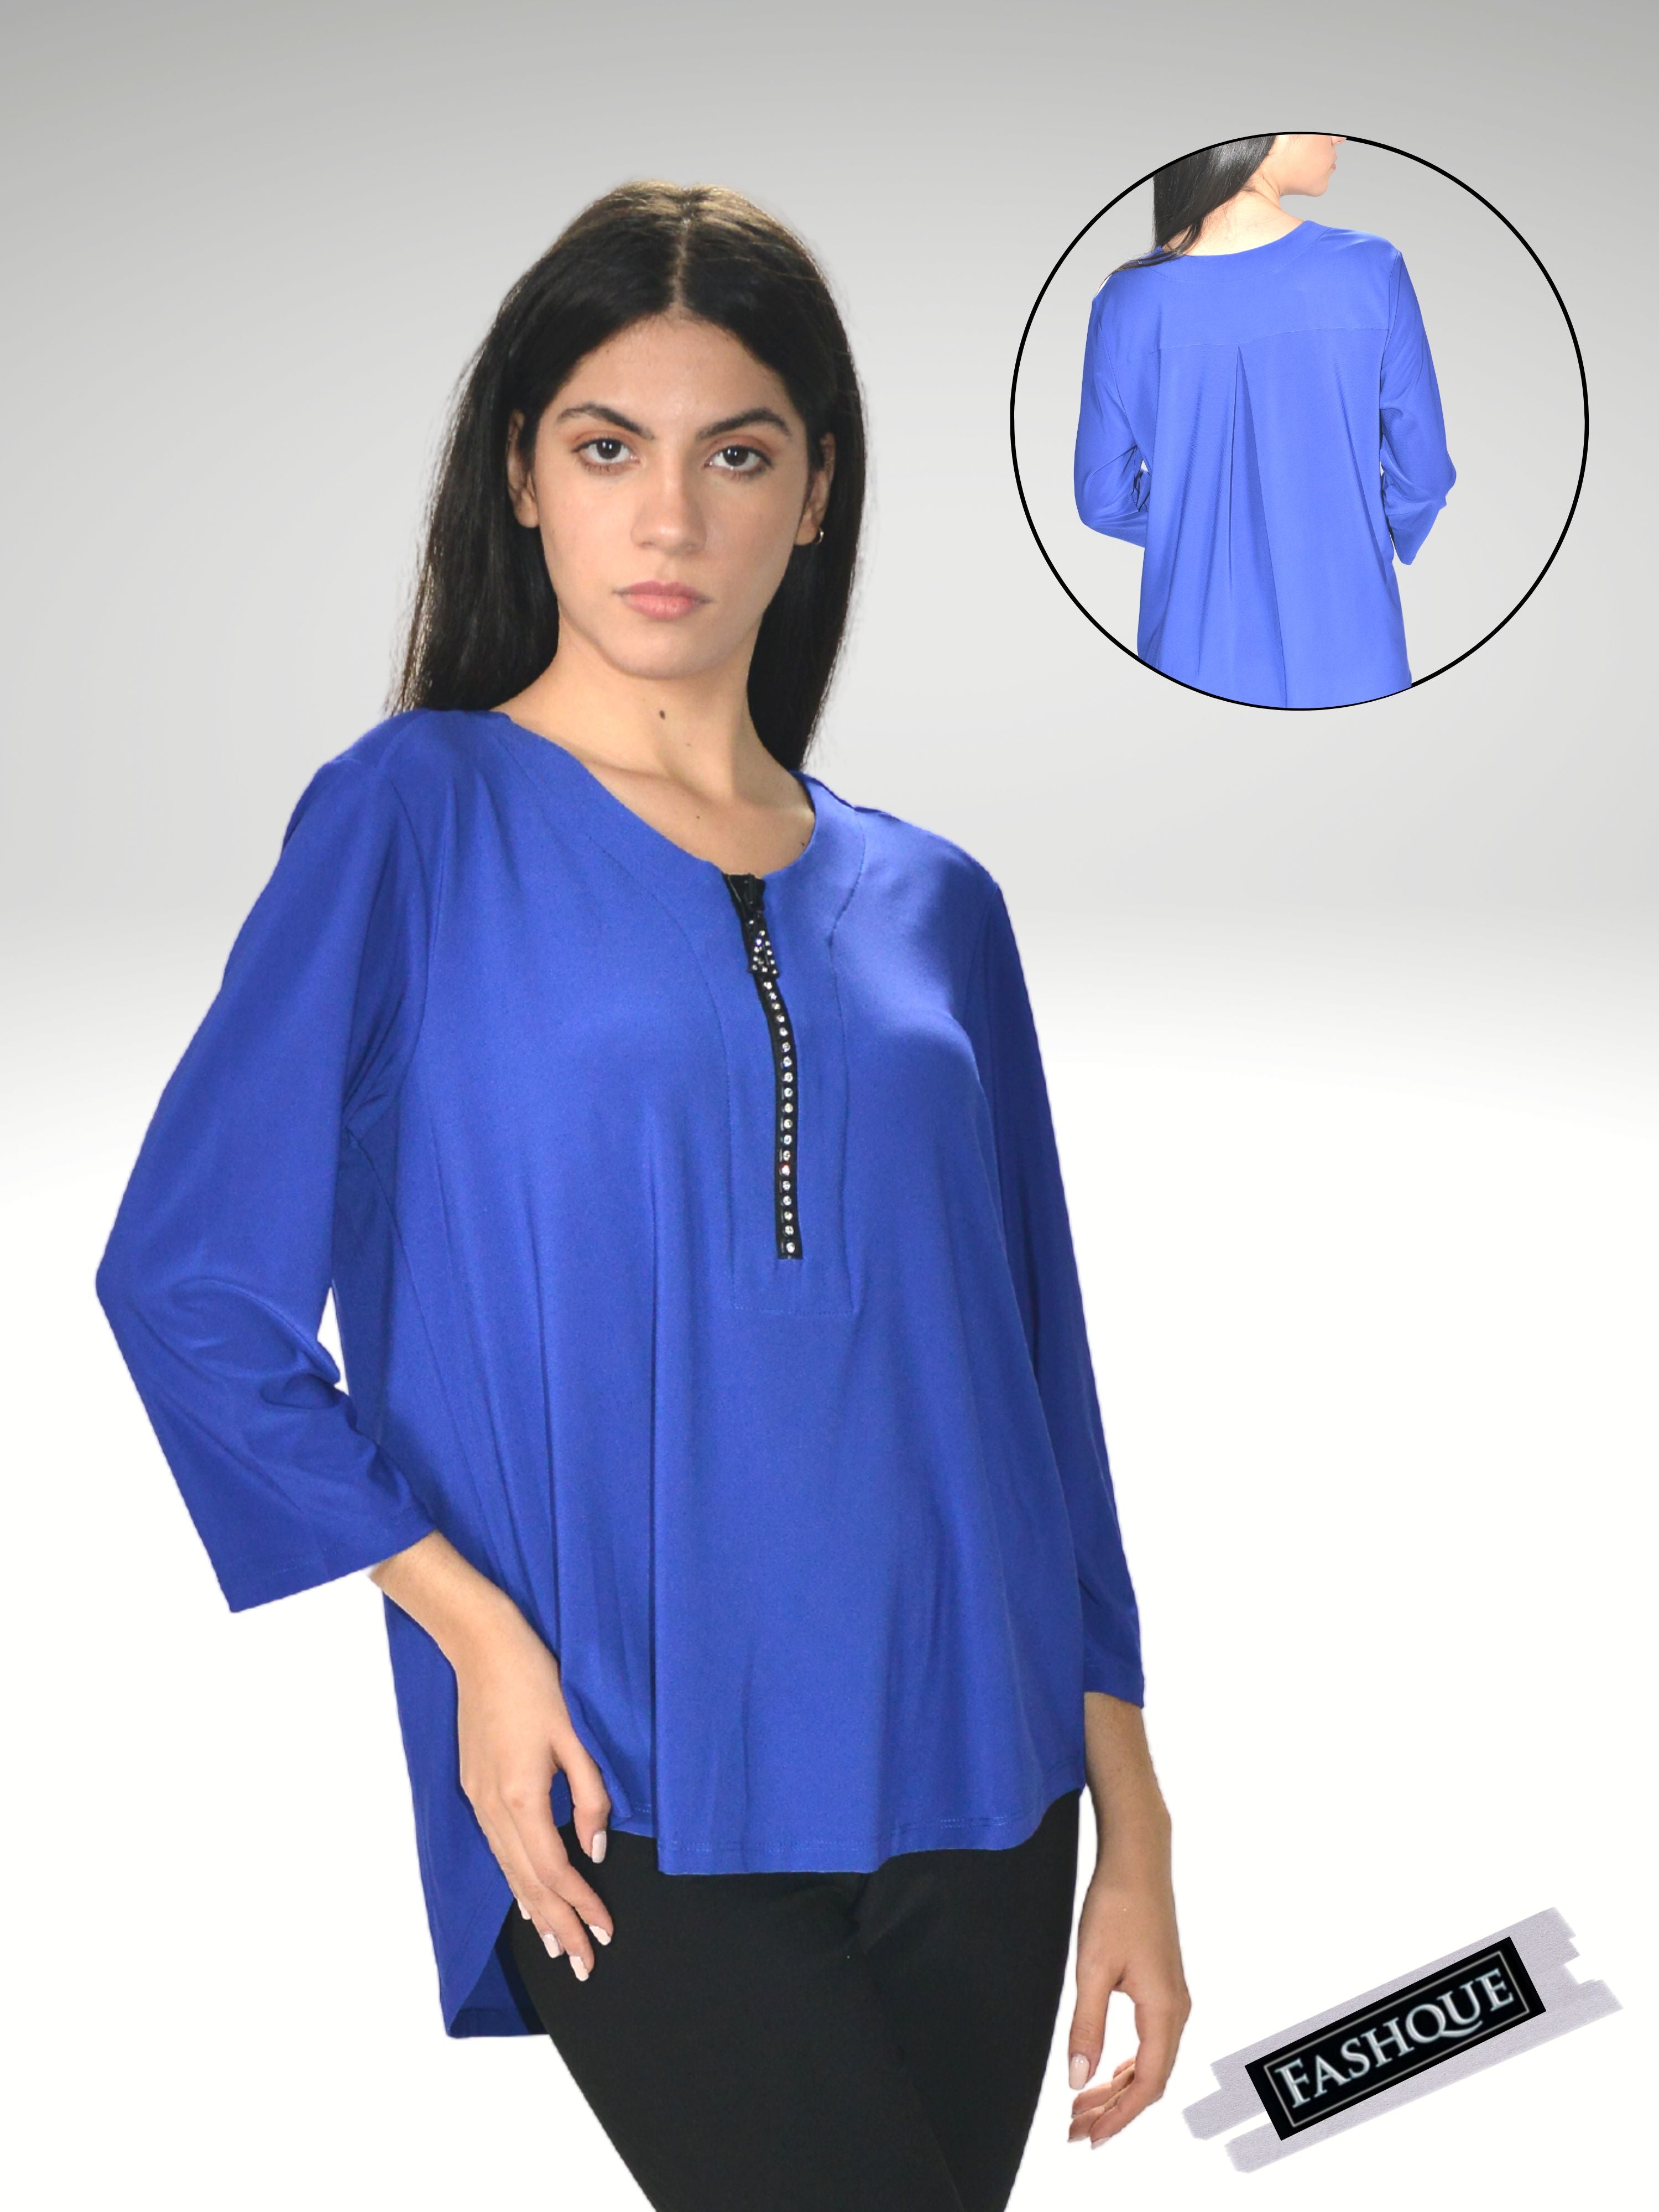 FASHQUE - CRYSTAL Zipper Front V Neck 3/4 Sleeve Tunic Top - T610